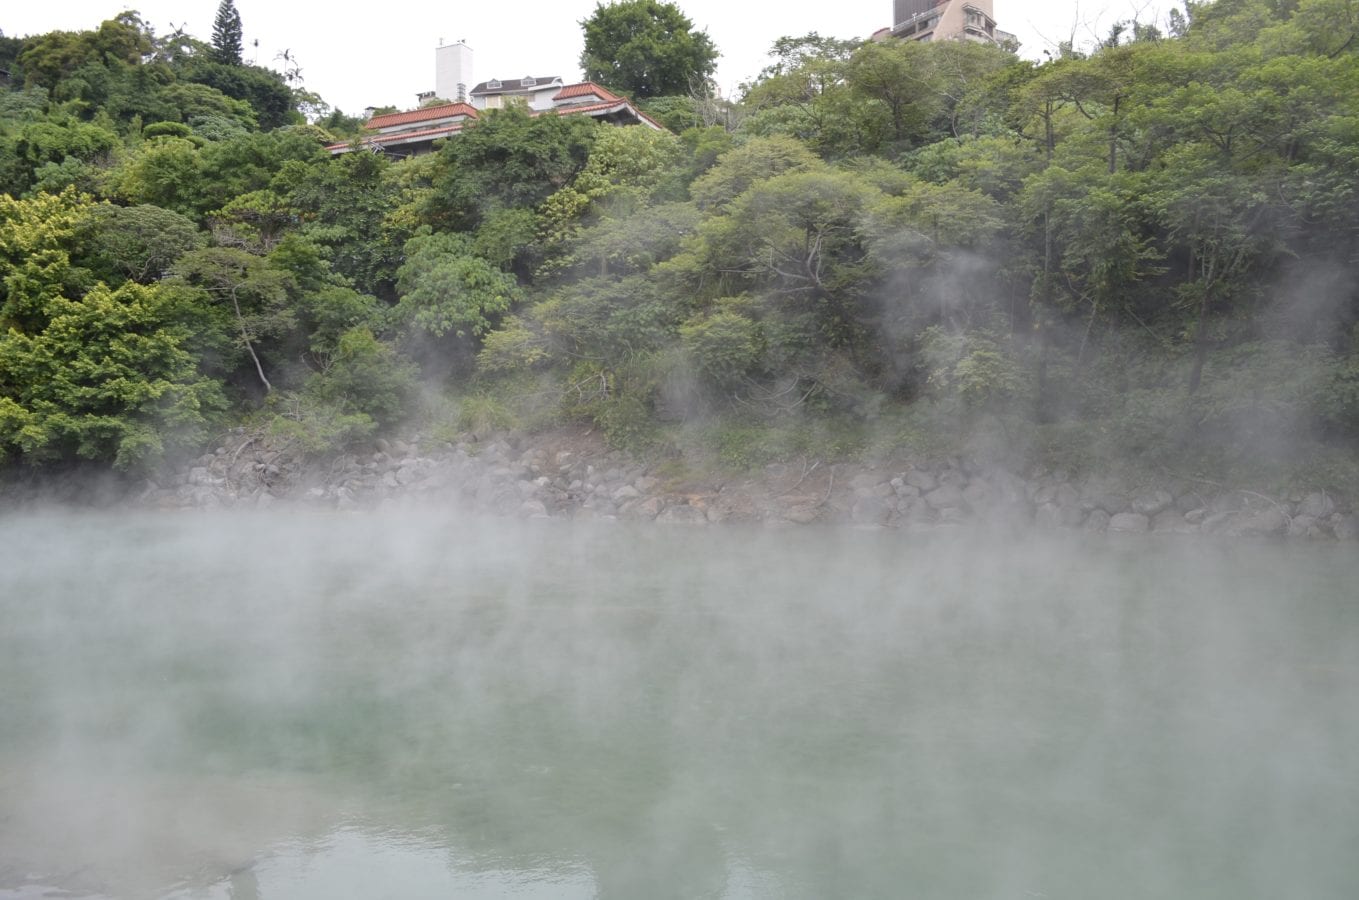 The hot springs in Taipei’s Beitou district